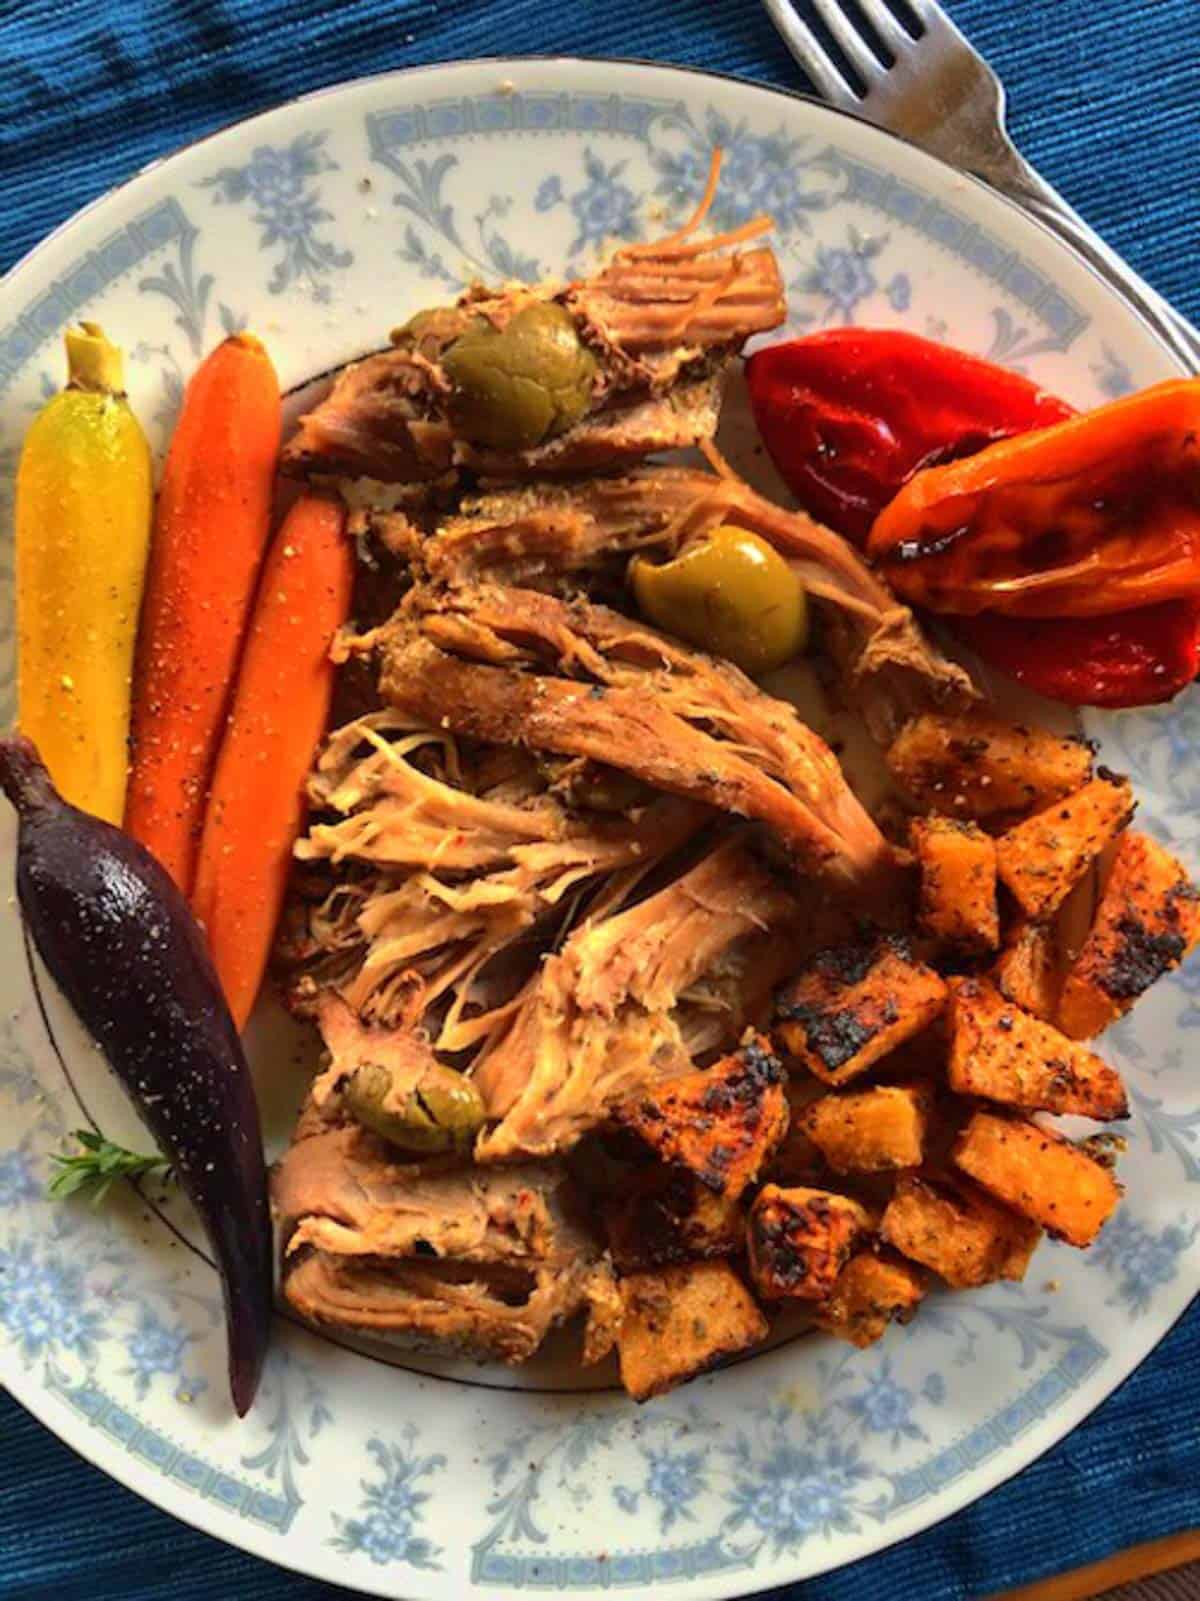 Plate of olive stuffed balsamic turkey thighs with roasted carrots and peppers and herb roasted rutabagas.